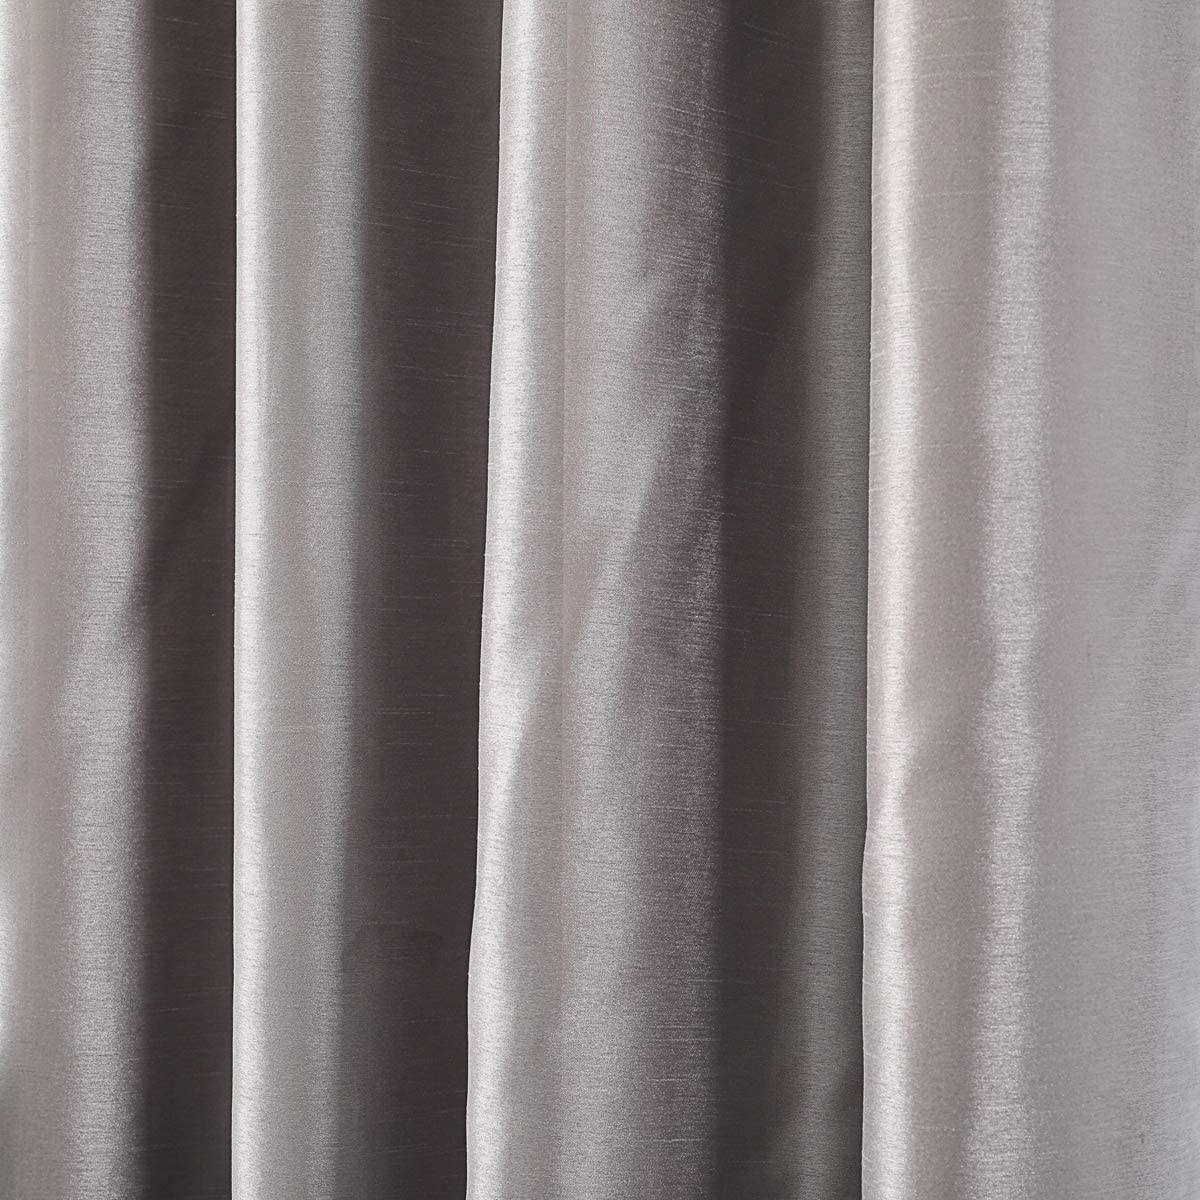 Blackout Curtains for Bedroom Stitching Luxury Faux Silk Curtain with Darkening Liner